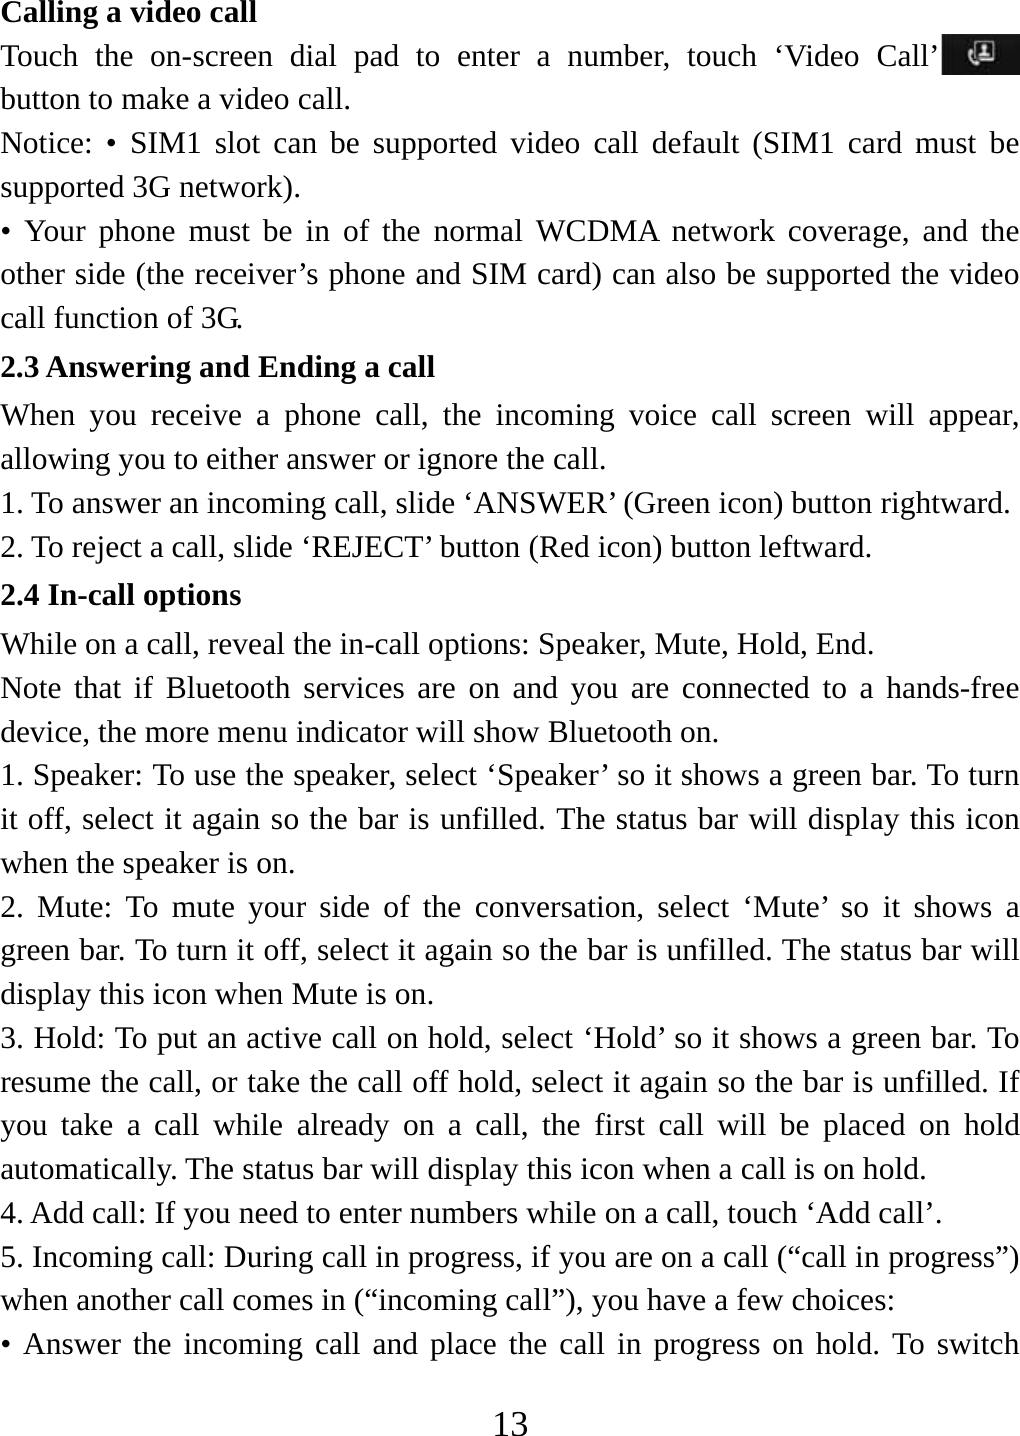   13Calling a video call Touch the on-screen dial pad to enter a number, touch ‘Video Call’  button to make a video call. Notice: • SIM1 slot can be supported video call default (SIM1 card must be supported 3G network). • Your phone must be in of the normal WCDMA network coverage, and the other side (the receiver’s phone and SIM card) can also be supported the video call function of 3G. 2.3 Answering and Ending a call When you receive a phone call, the incoming voice call screen will appear, allowing you to either answer or ignore the call.   1. To answer an incoming call, slide ‘ANSWER’ (Green icon) button rightward. 2. To reject a call, slide ‘REJECT’ button (Red icon) button leftward. 2.4 In-call options While on a call, reveal the in-call options: Speaker, Mute, Hold, End.   Note that if Bluetooth services are on and you are connected to a hands-free device, the more menu indicator will show Bluetooth on.   1. Speaker: To use the speaker, select ‘Speaker’ so it shows a green bar. To turn it off, select it again so the bar is unfilled. The status bar will display this icon when the speaker is on.   2. Mute: To mute your side of the conversation, select ‘Mute’ so it shows a green bar. To turn it off, select it again so the bar is unfilled. The status bar will display this icon when Mute is on.   3. Hold: To put an active call on hold, select ‘Hold’ so it shows a green bar. To resume the call, or take the call off hold, select it again so the bar is unfilled. If you take a call while already on a call, the first call will be placed on hold automatically. The status bar will display this icon when a call is on hold.   4. Add call: If you need to enter numbers while on a call, touch ‘Add call’.   5. Incoming call: During call in progress, if you are on a call (“call in progress”) when another call comes in (“incoming call”), you have a few choices:   • Answer the incoming call and place the call in progress on hold. To switch 